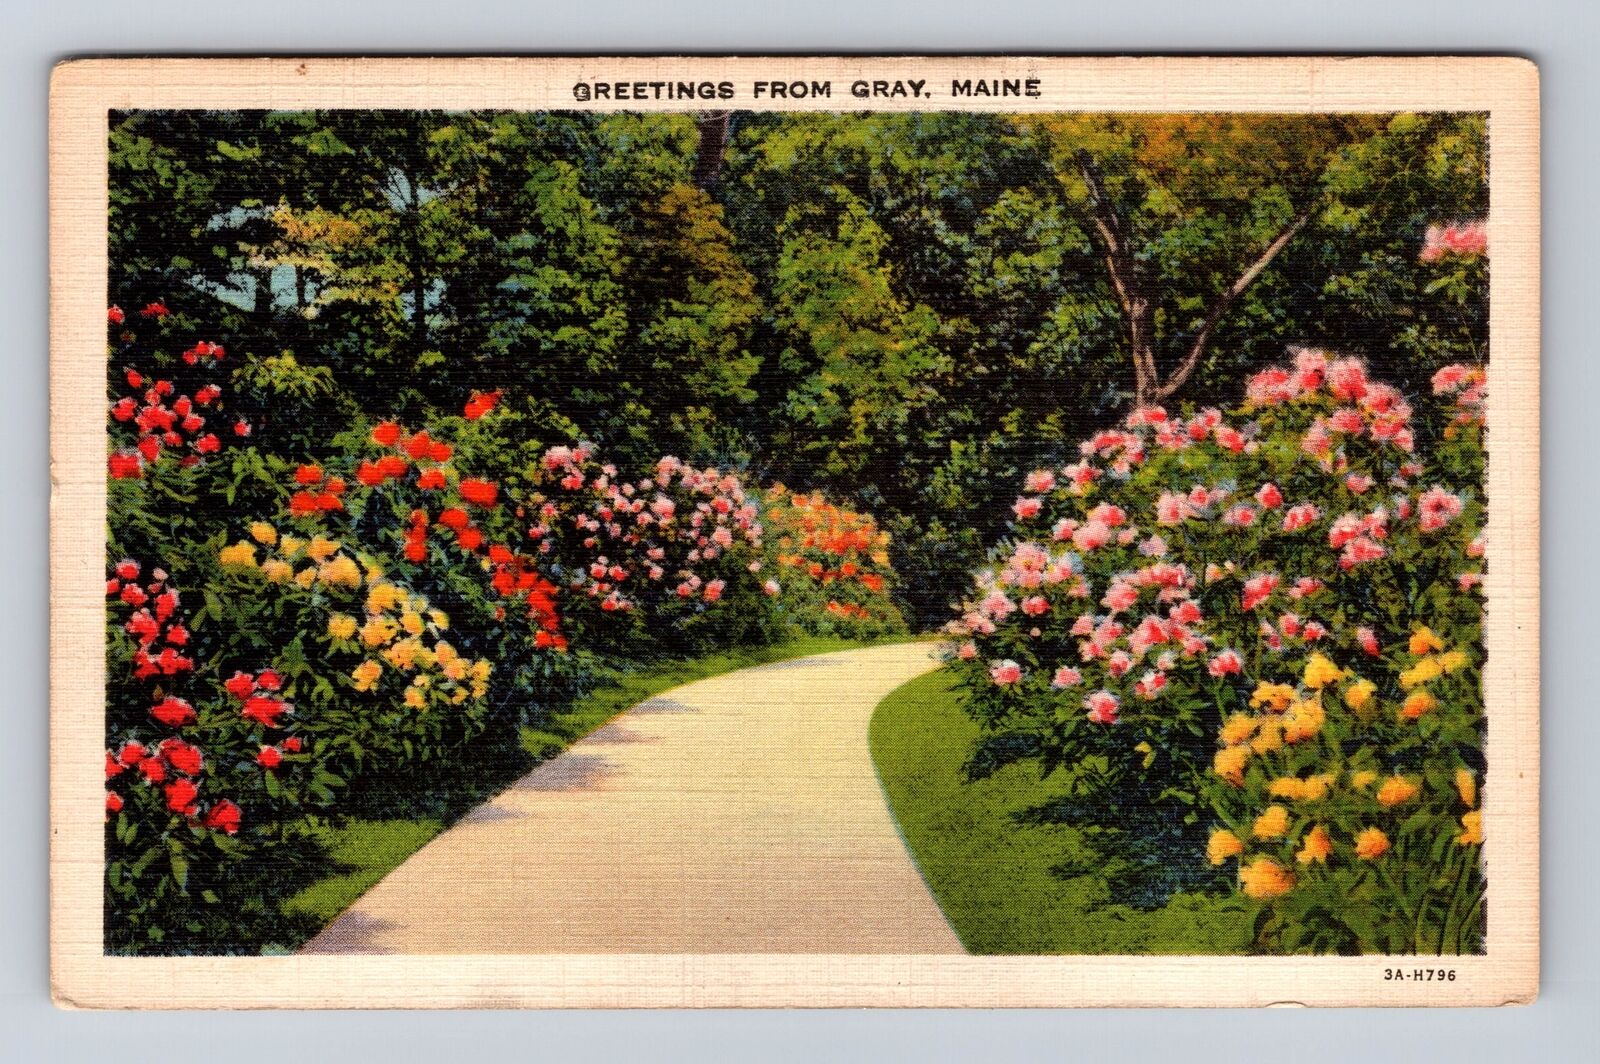 Gray ME-Maine, Greetings, Scenic Flower Lined Walkway, Antique Vintage Postcard